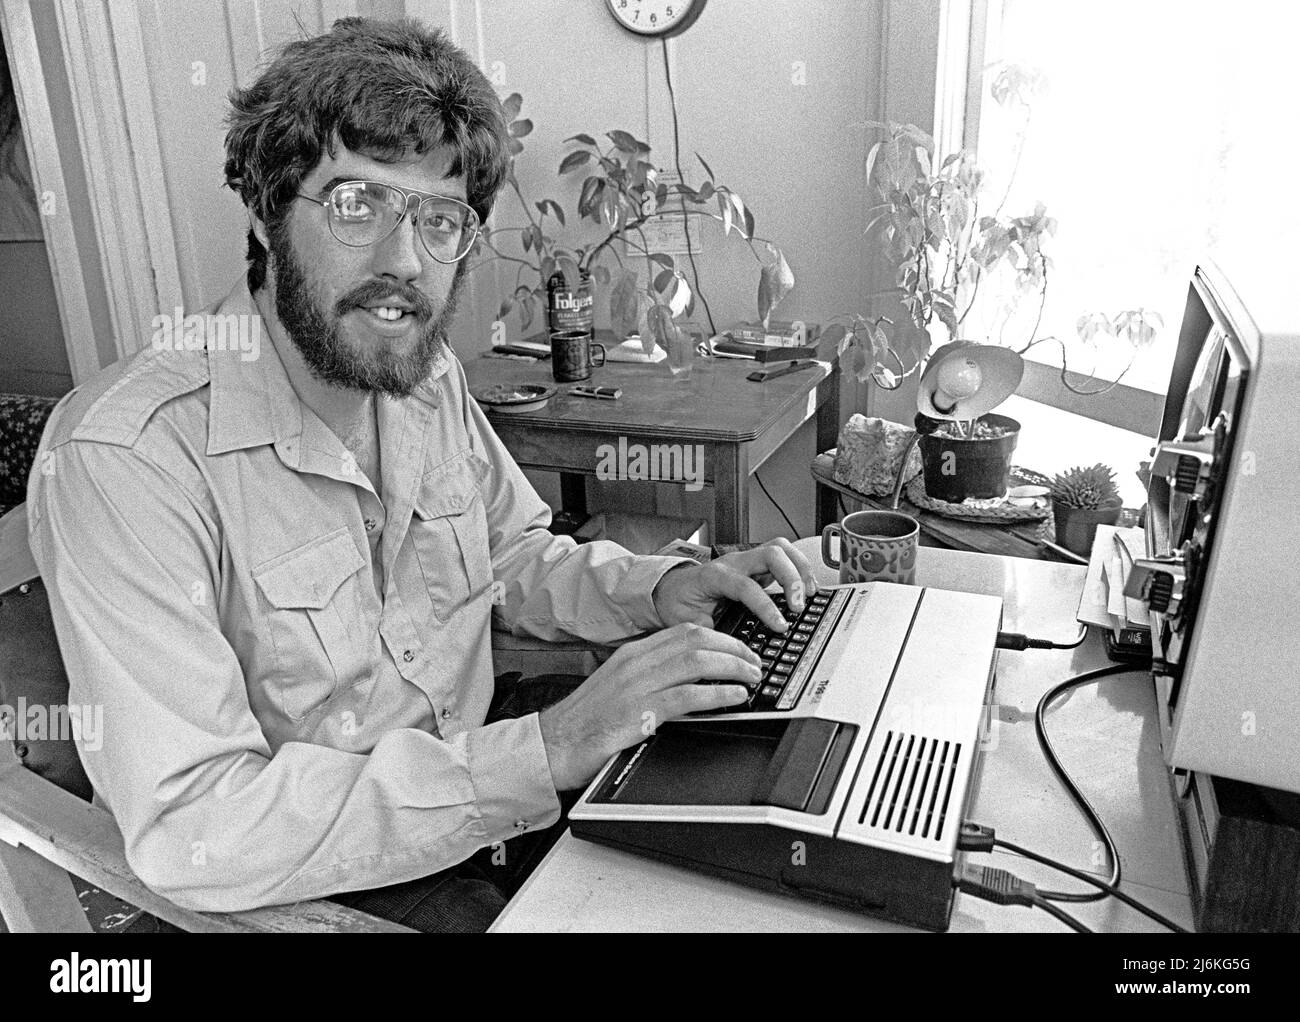 Mike Moore creating games on his TI 99-4a computer based on battles in the Civil War in San Francisco,. saving his game data on a tape recorder, He also created a modem dial up Bulletin Board game called Draken's Keep. September 1983 Stock Photo